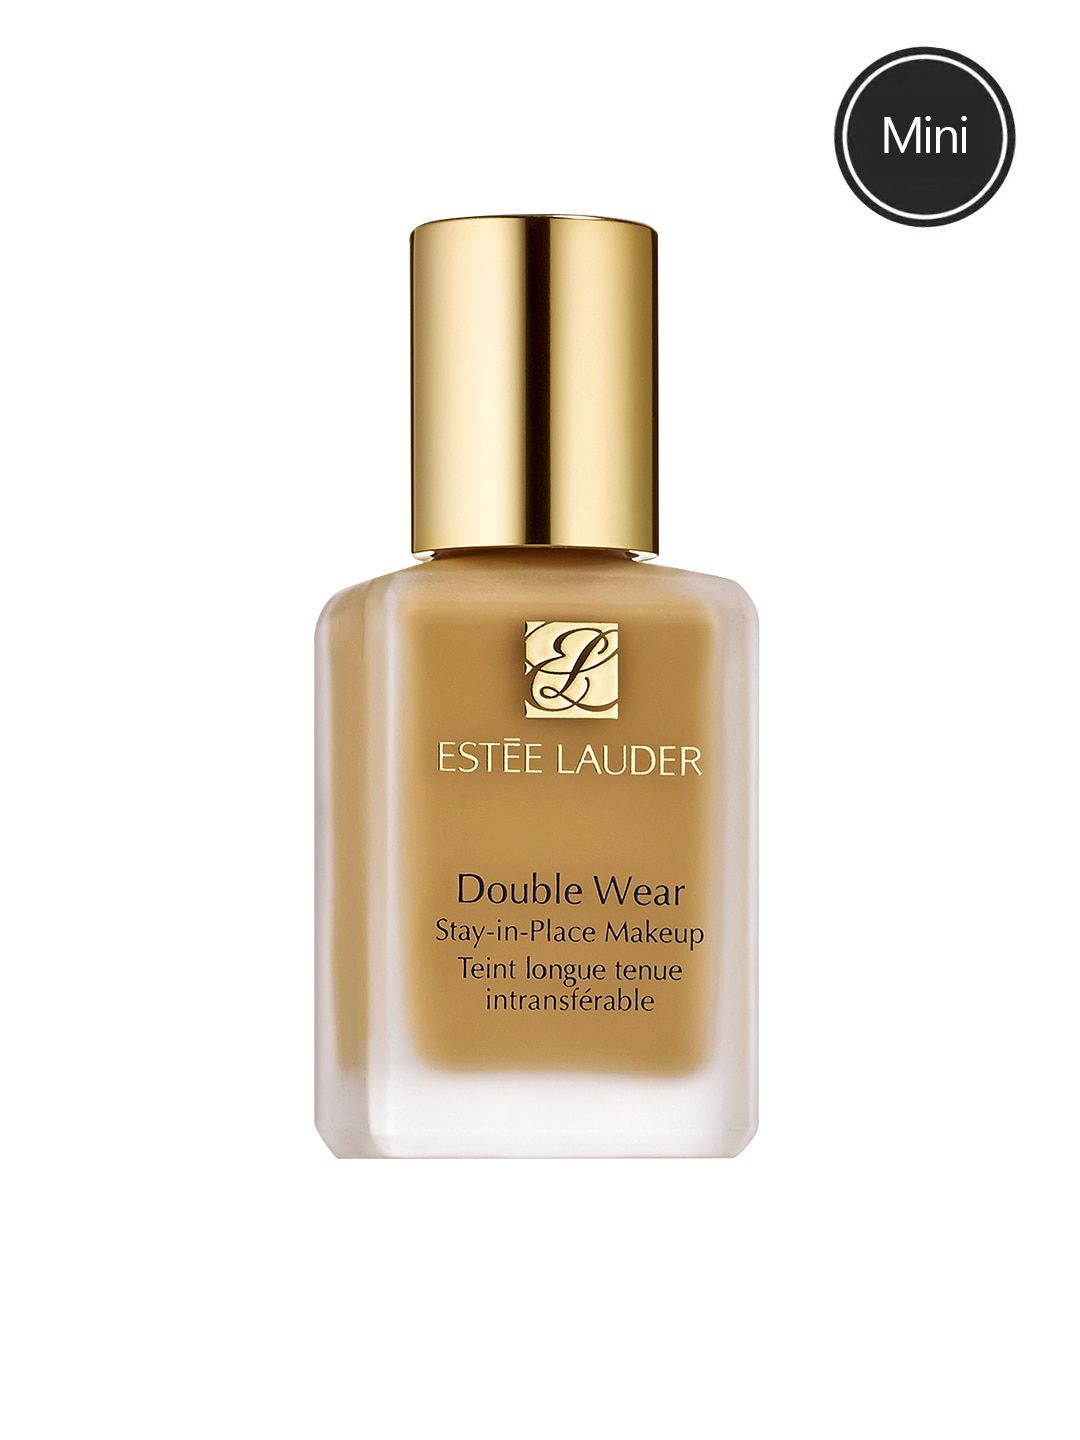 Estee Lauder Mini Double Wear Stay-In-Place Makeup Foundation with SPF 10 - Cashew 3W2 Price in India